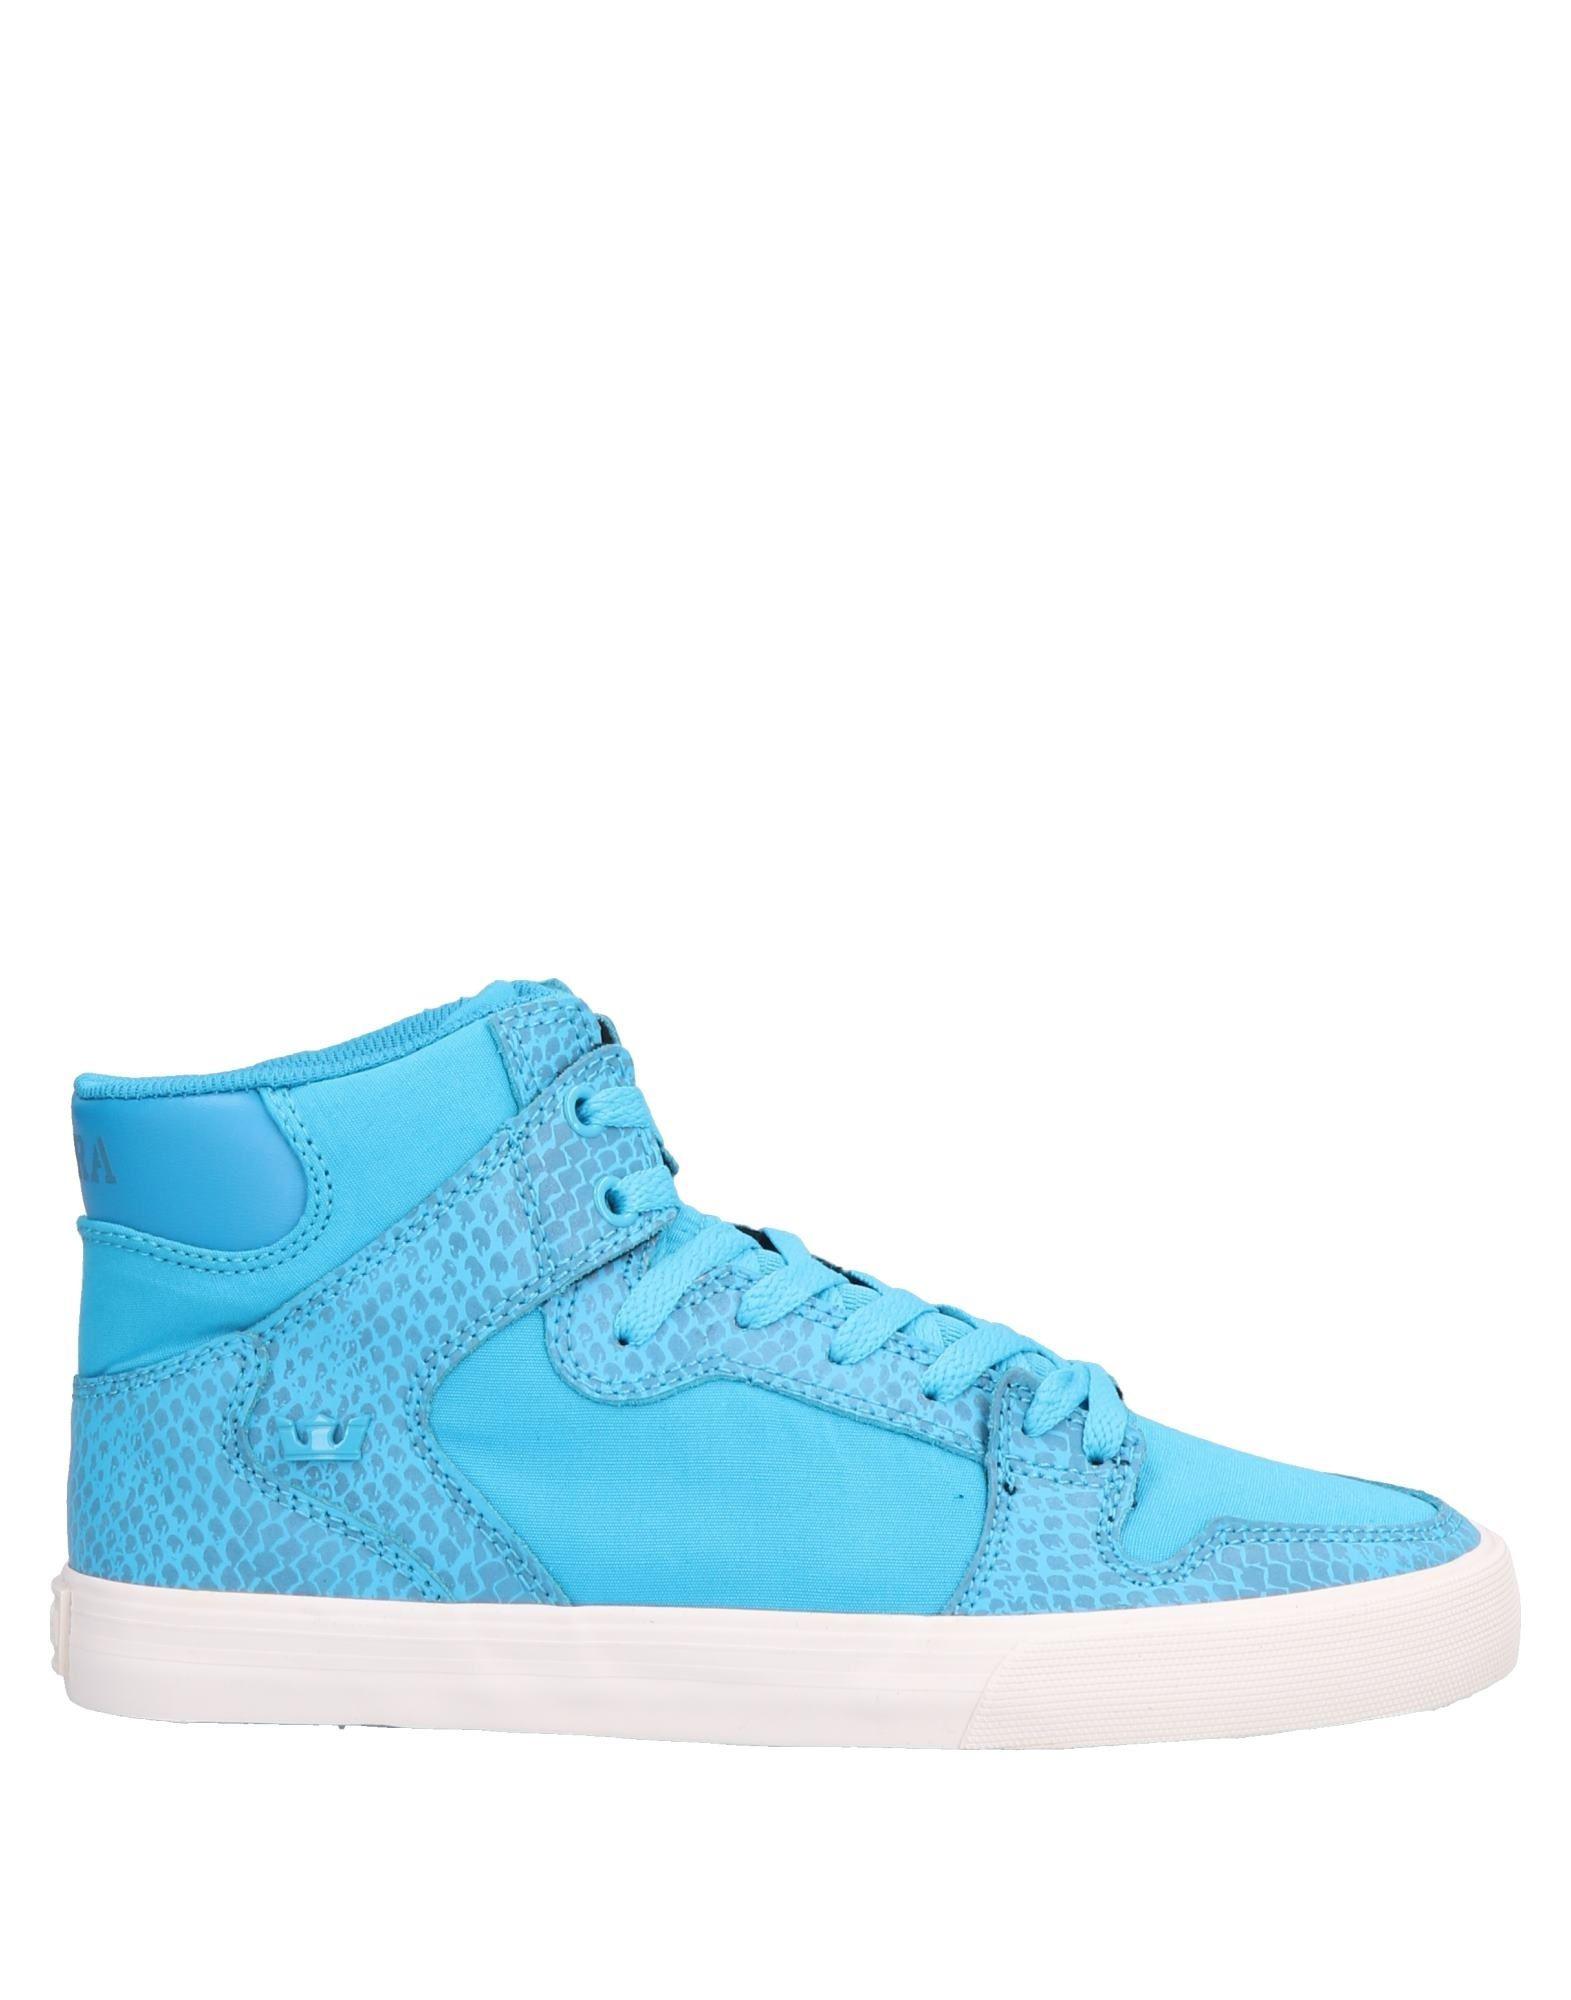 Supra Leather High-tops & Sneakers in Azure (Blue) - Lyst